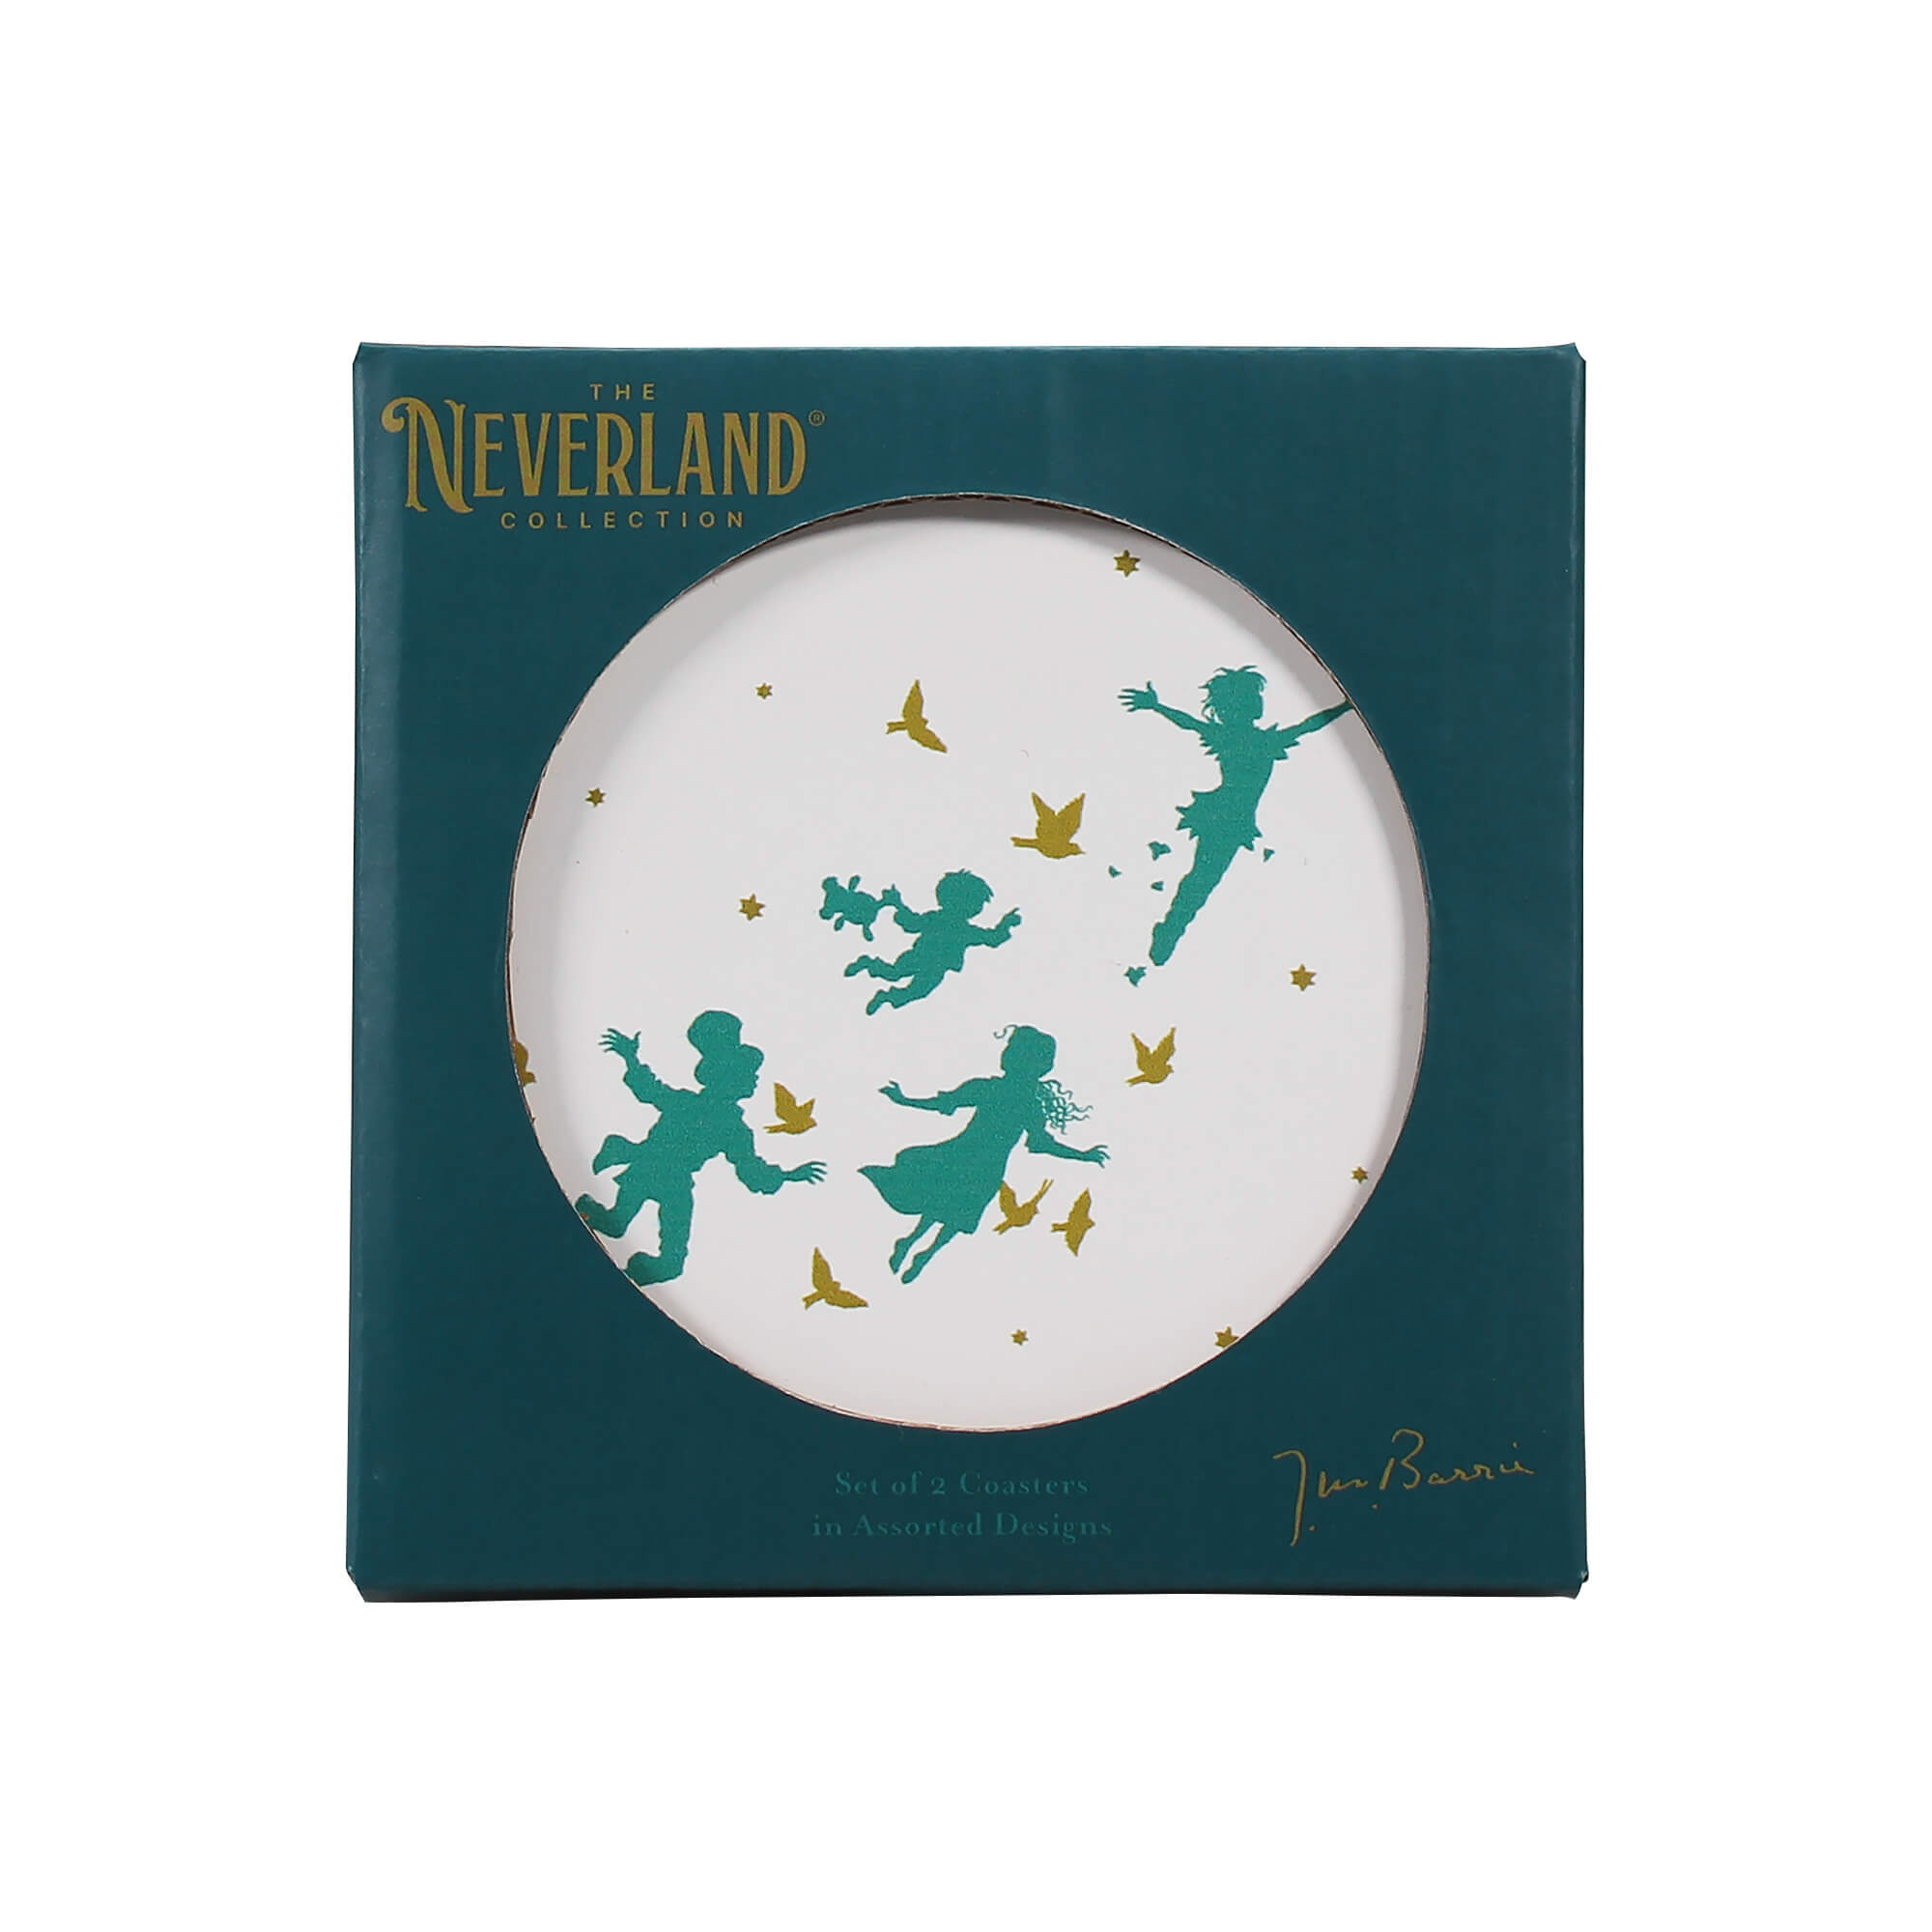 Two Peter Pan and Wendy inspired coasters in box